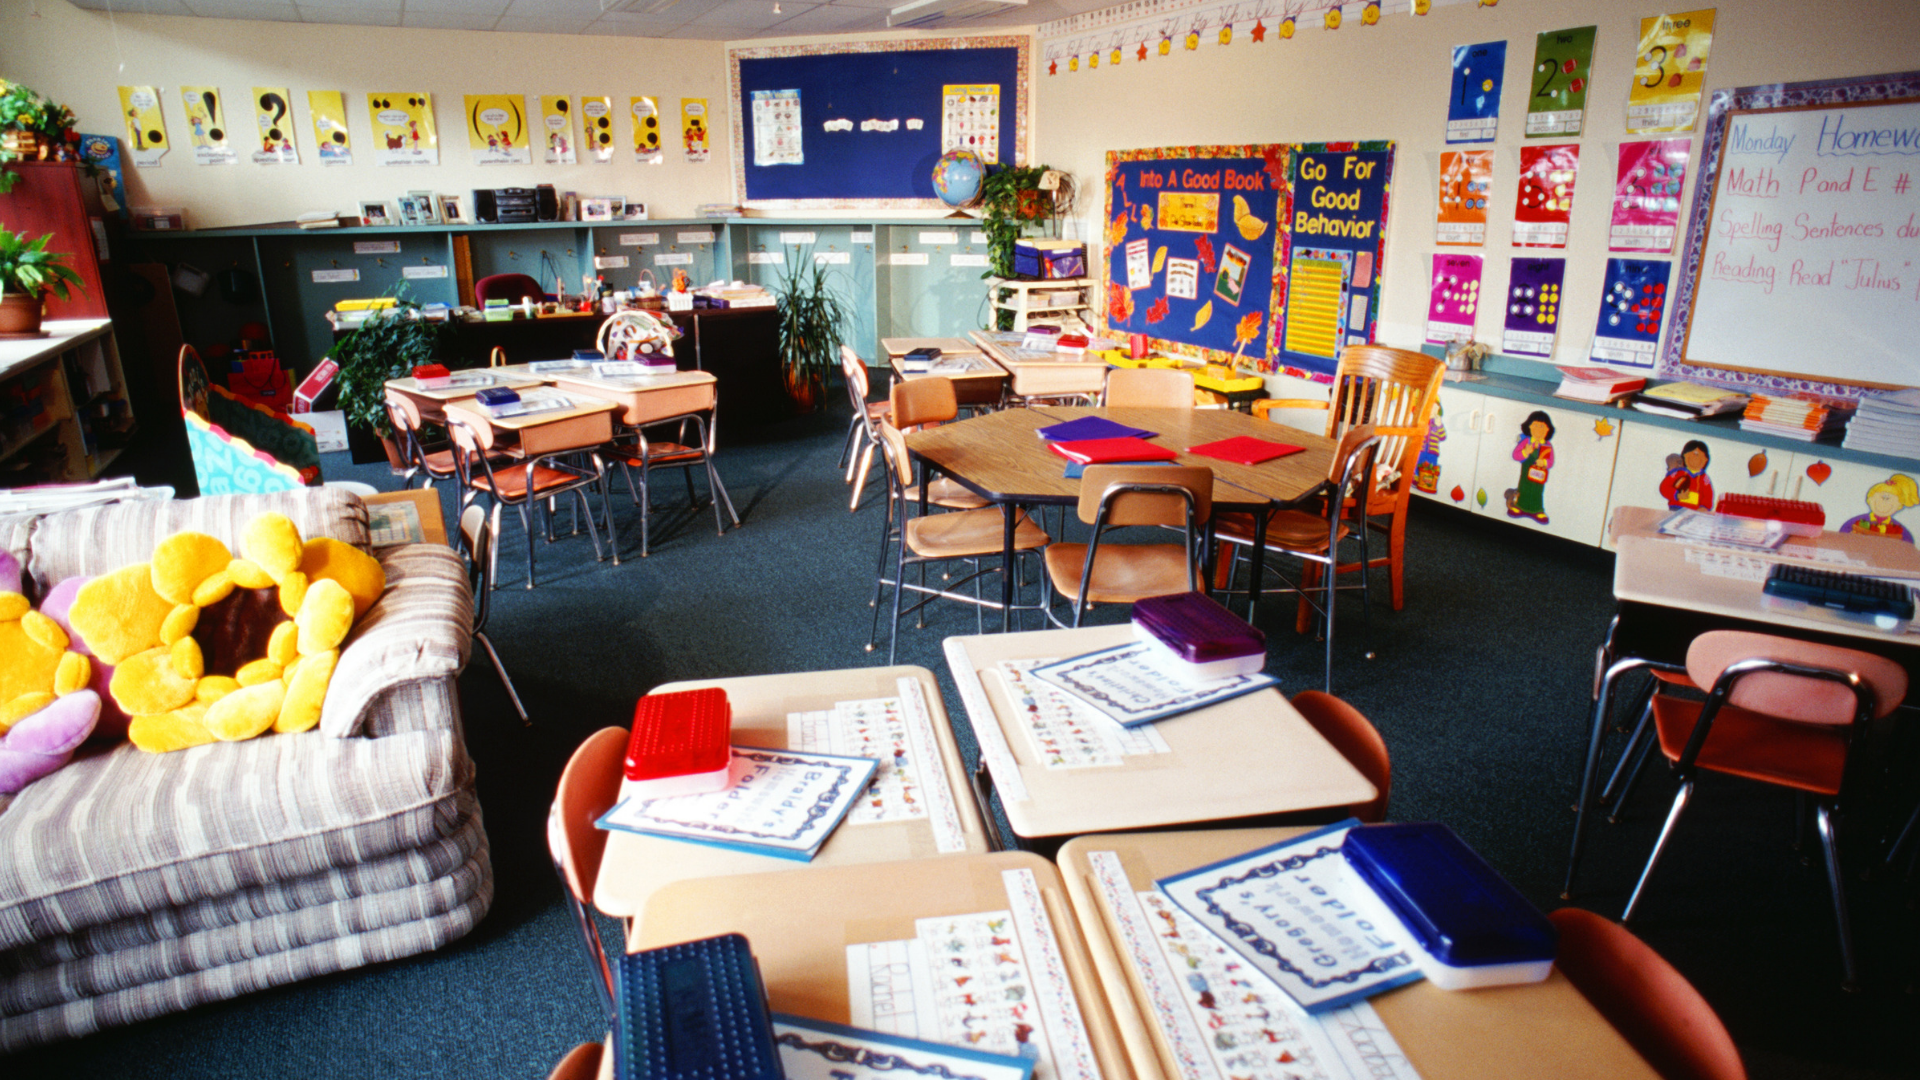 How Does Seating Arrangement in the Classroom Influence Classroom